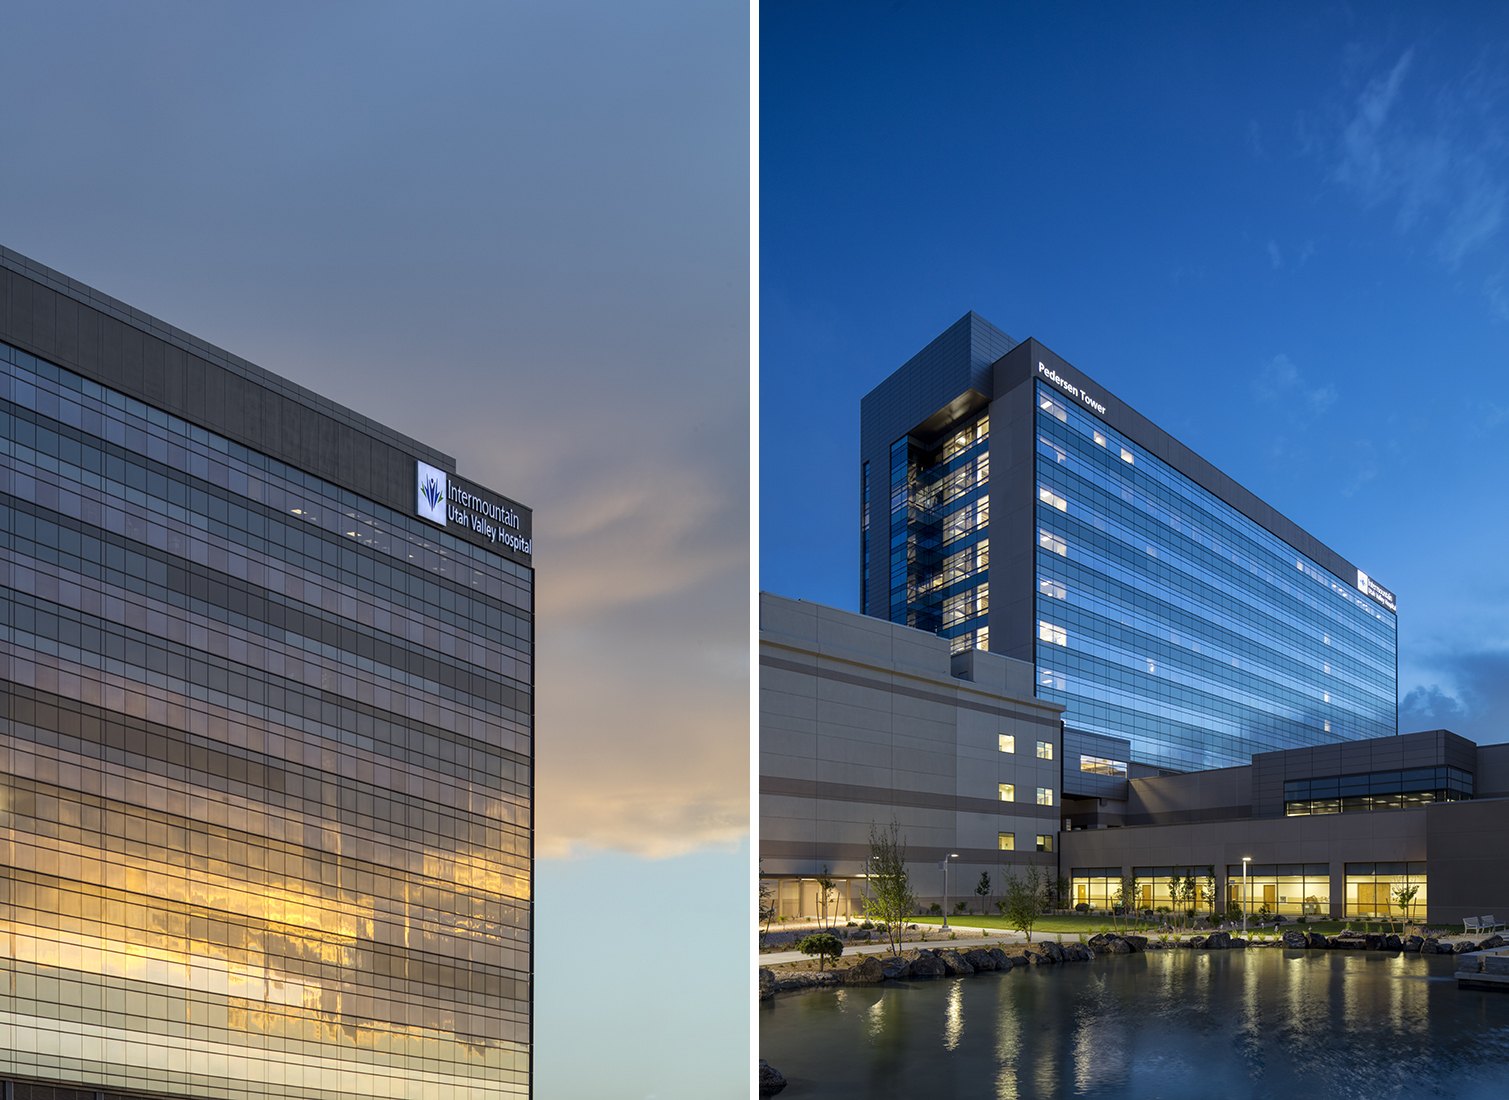 Utah Valley Hospital for HDR Inc & Intermountain Health.Architectural Photography by: Paul Richer / RICHER IMAGES